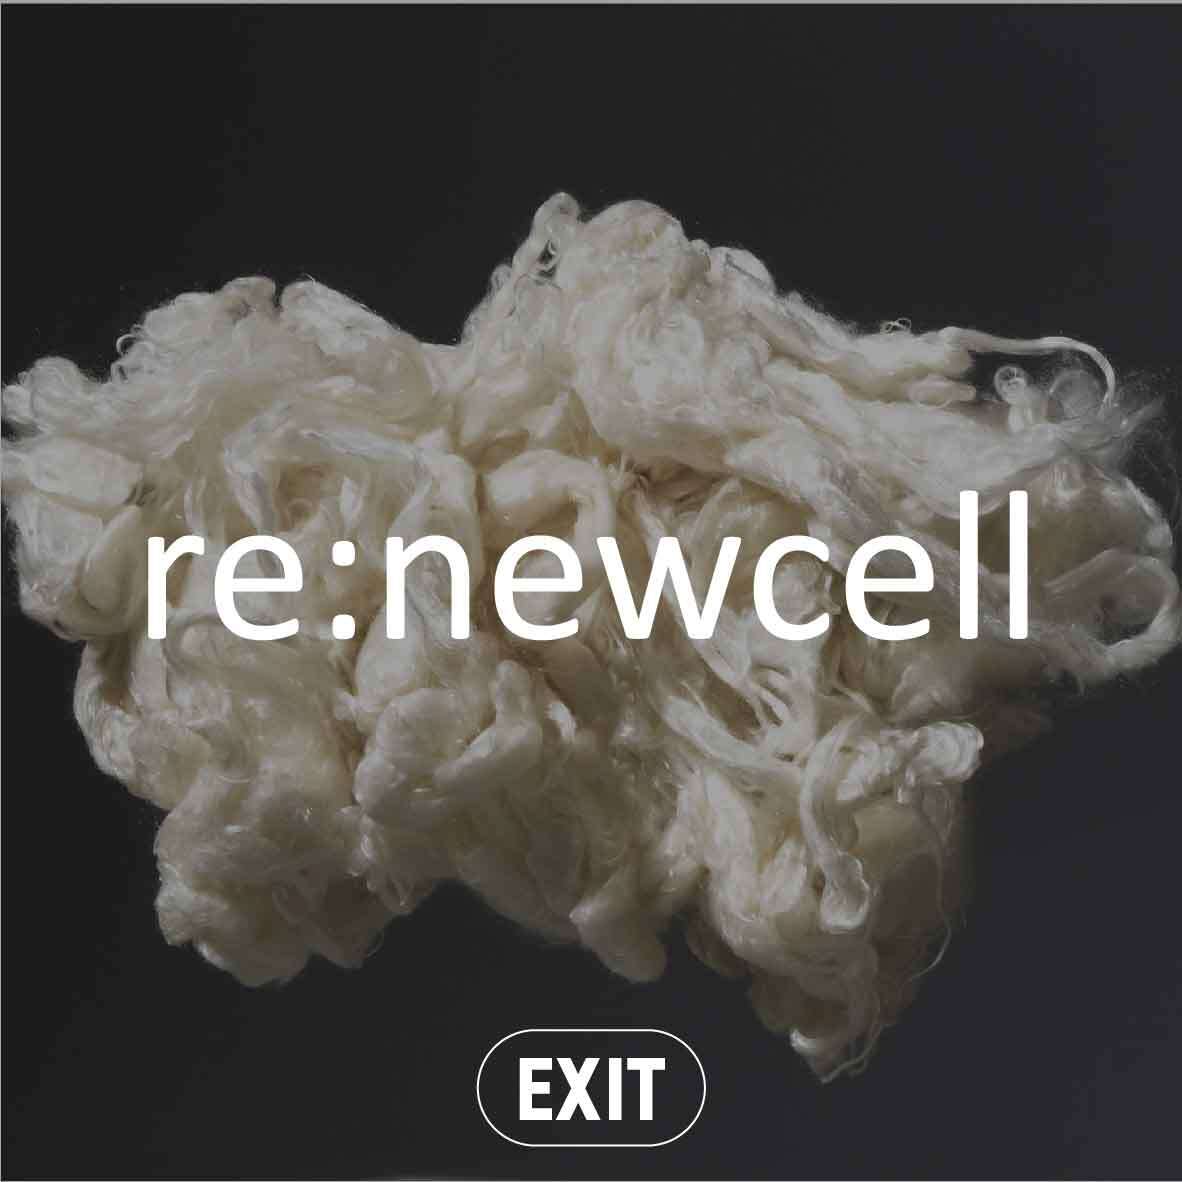 Re:newcell